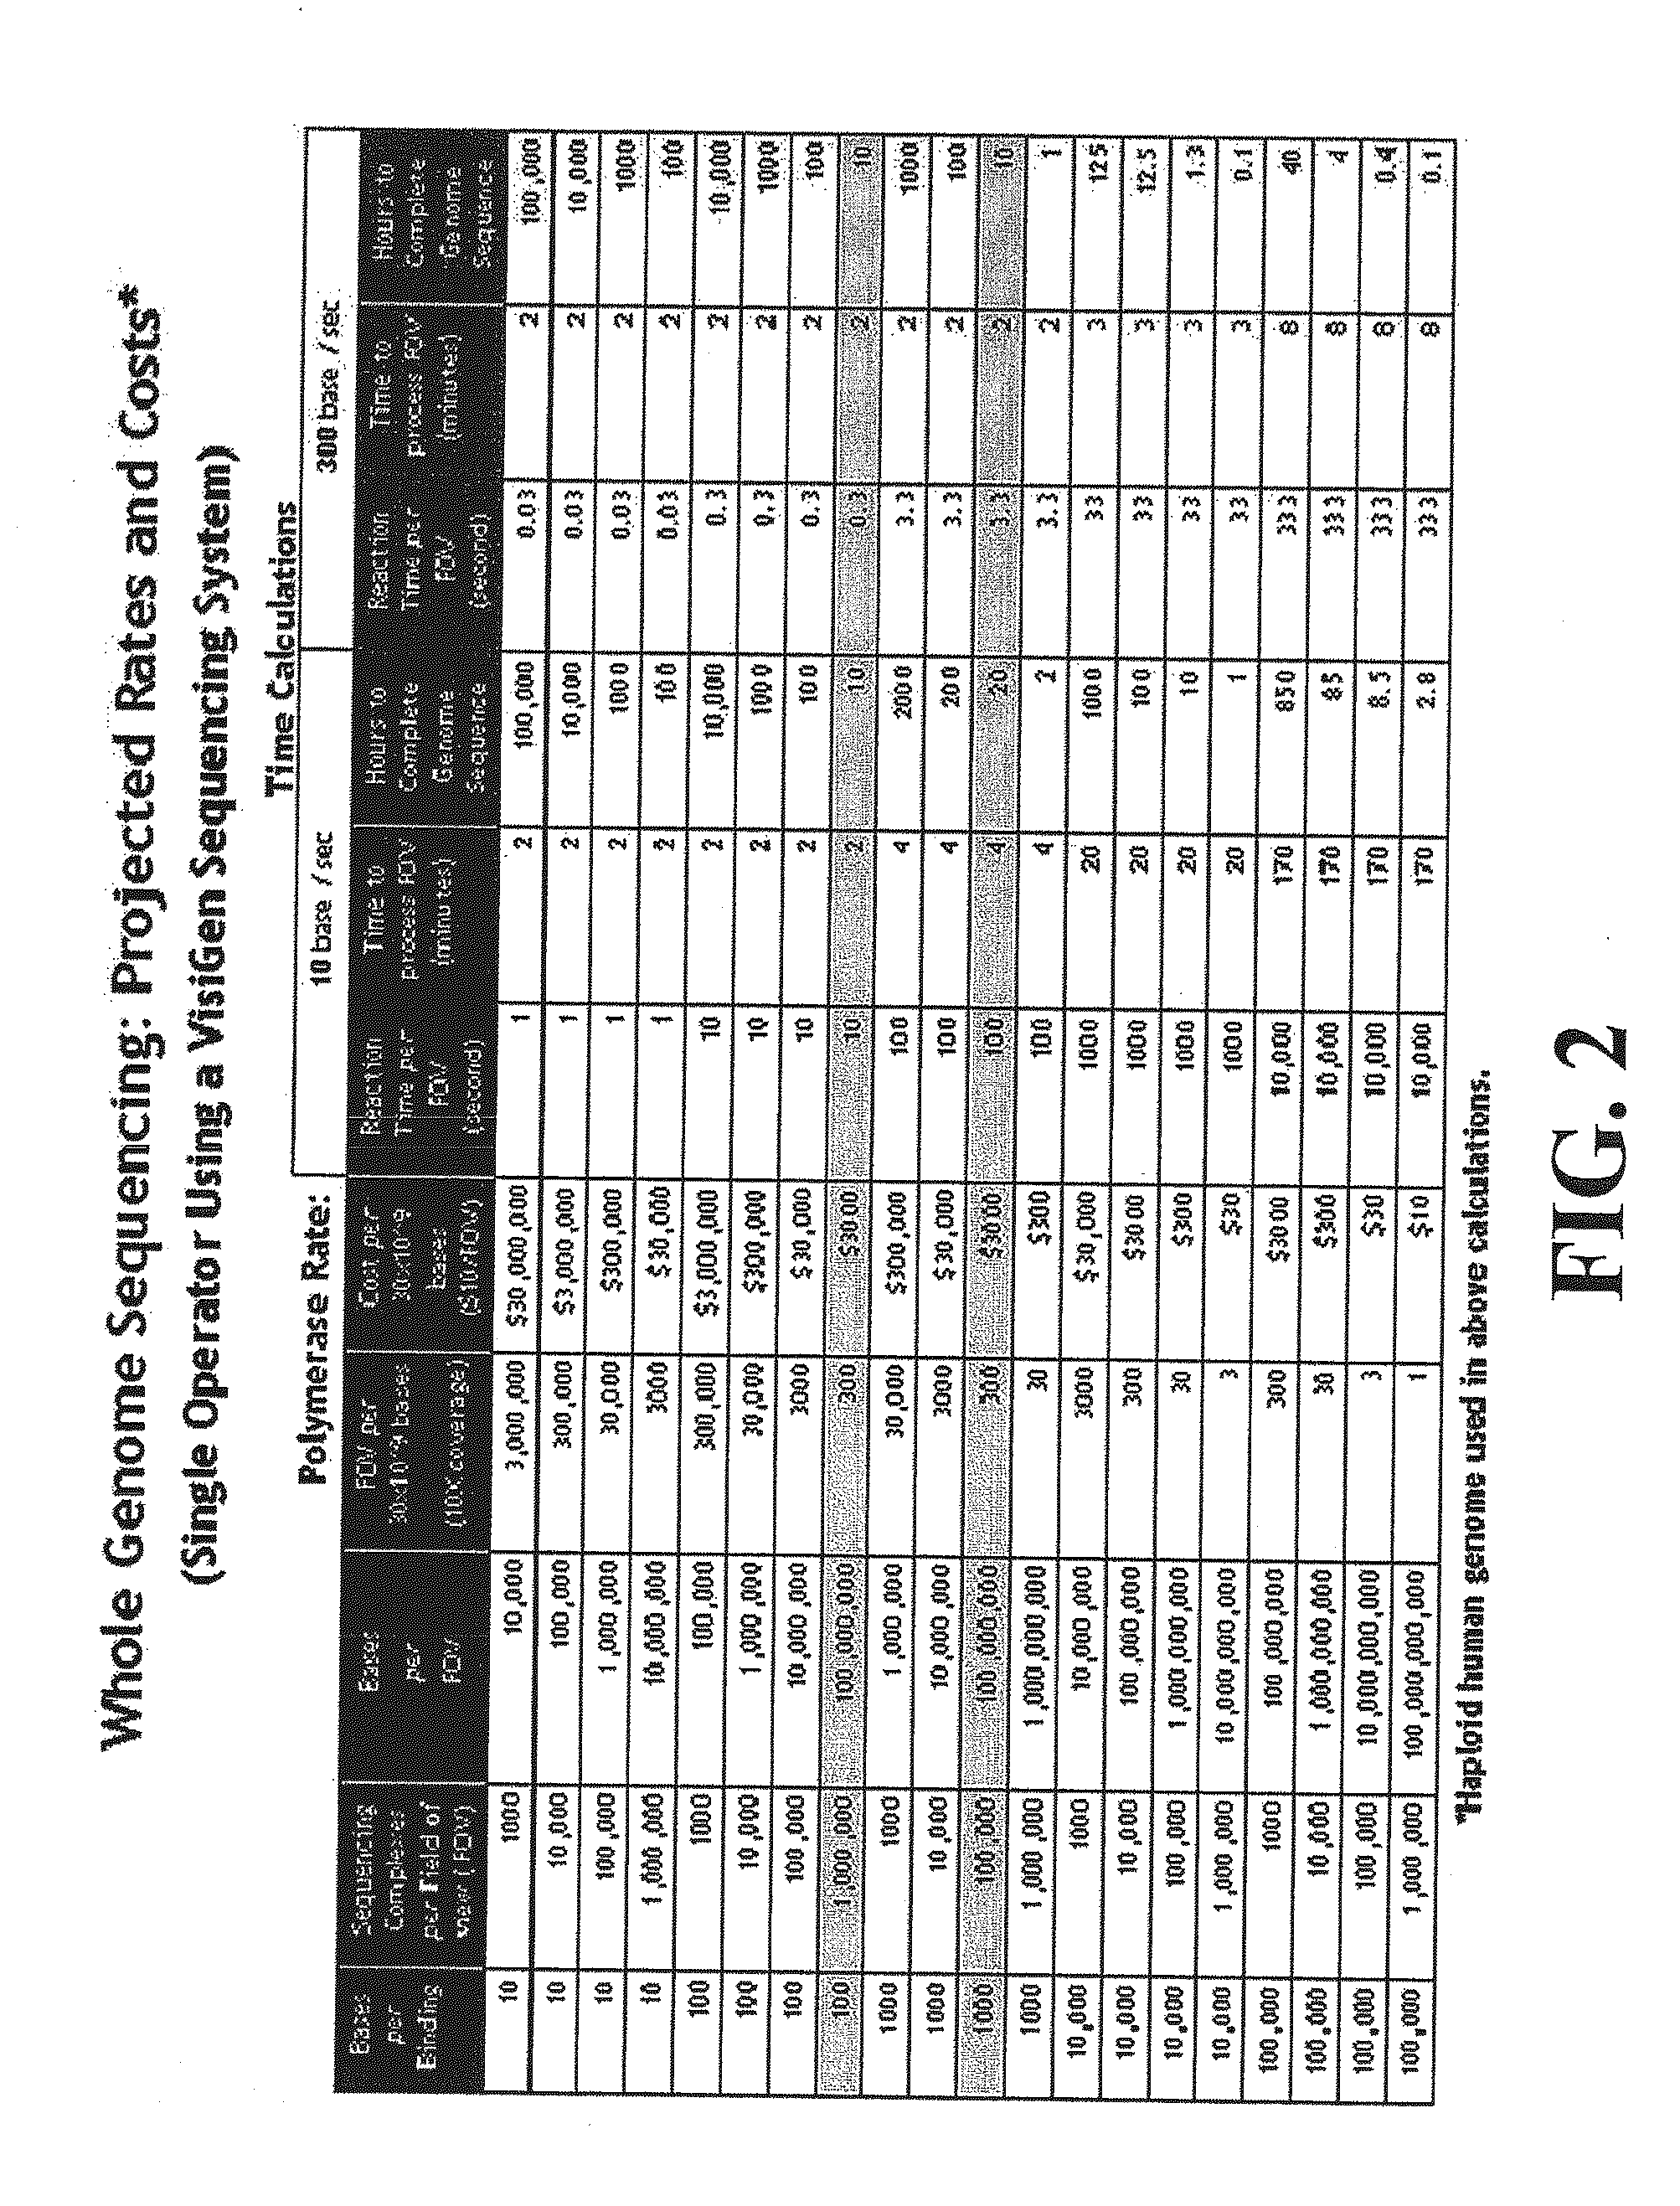 Compositions, methods and systems for single molecule sequencing